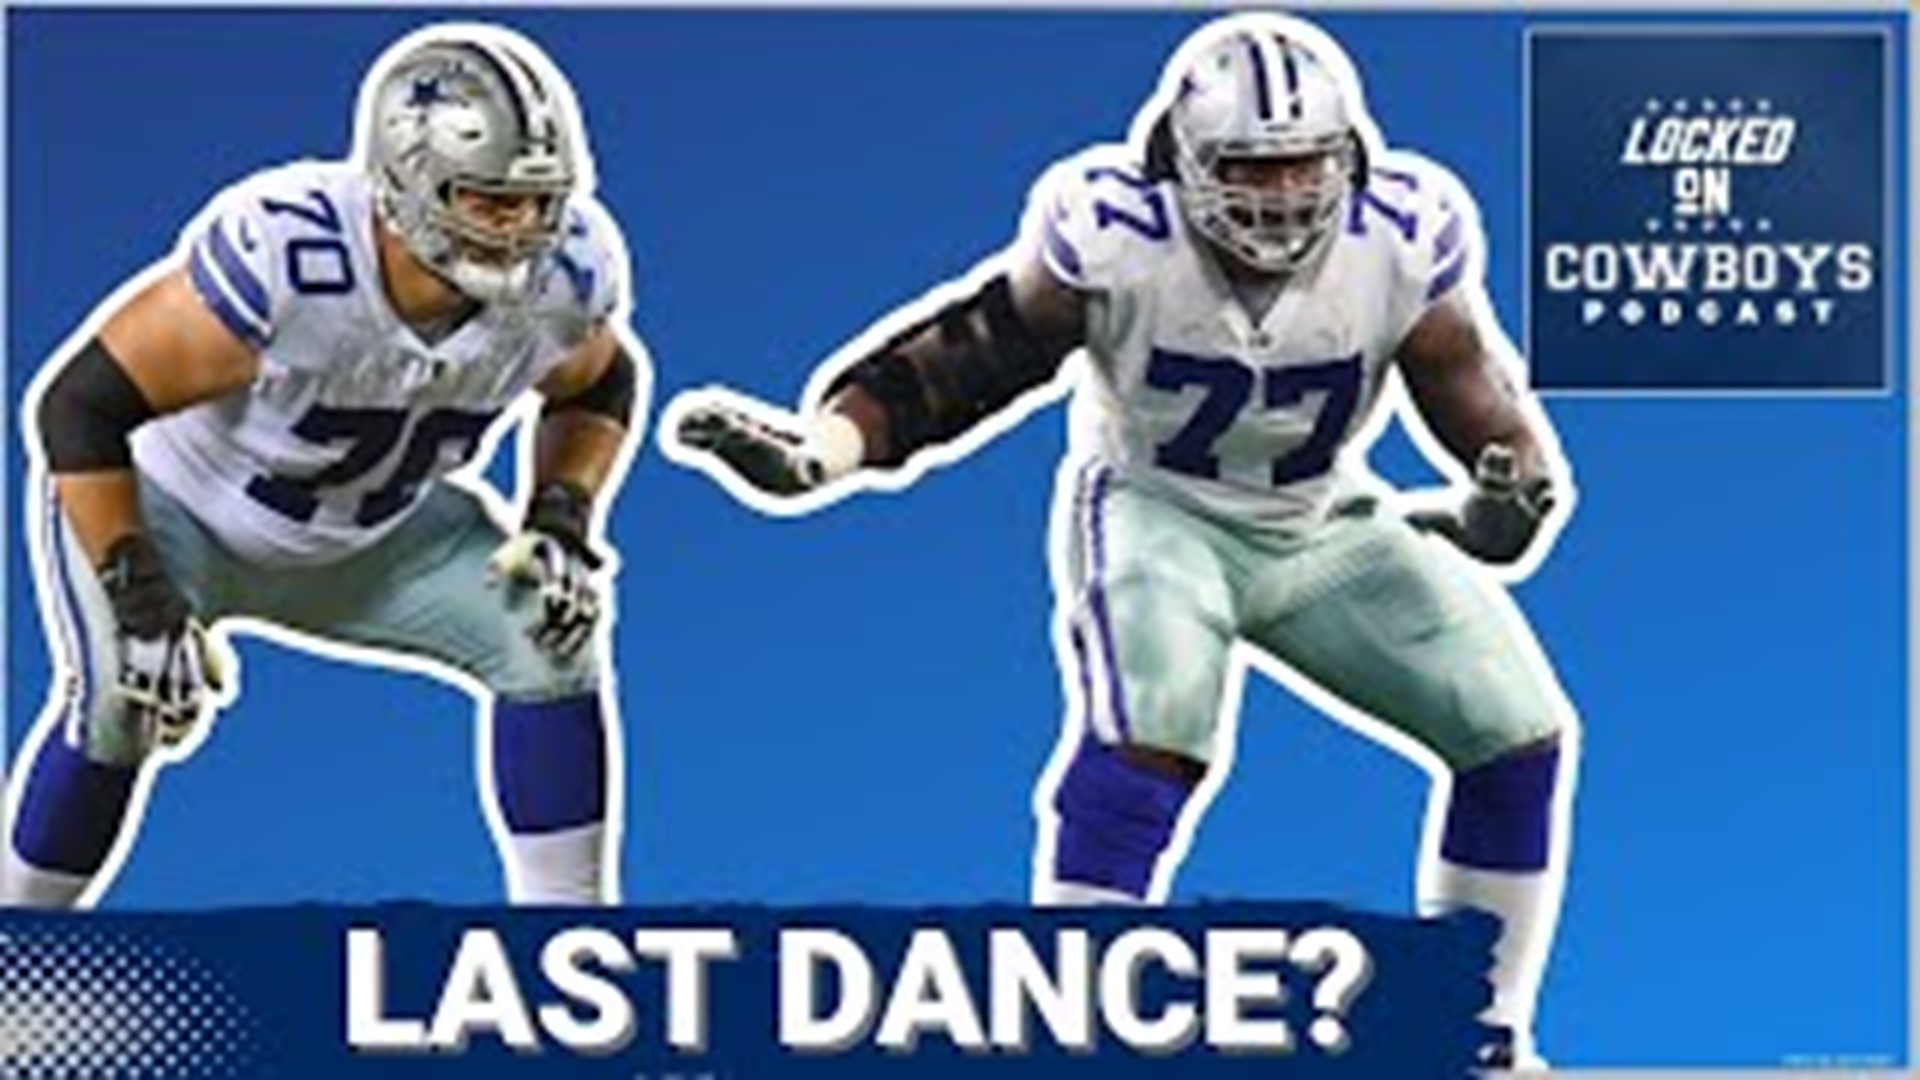 Will this be the last season for Dallas Cowboys OL Tyron Smith and Zack Martin? And will the Cowboys be able to re-sign Smith in free agency?